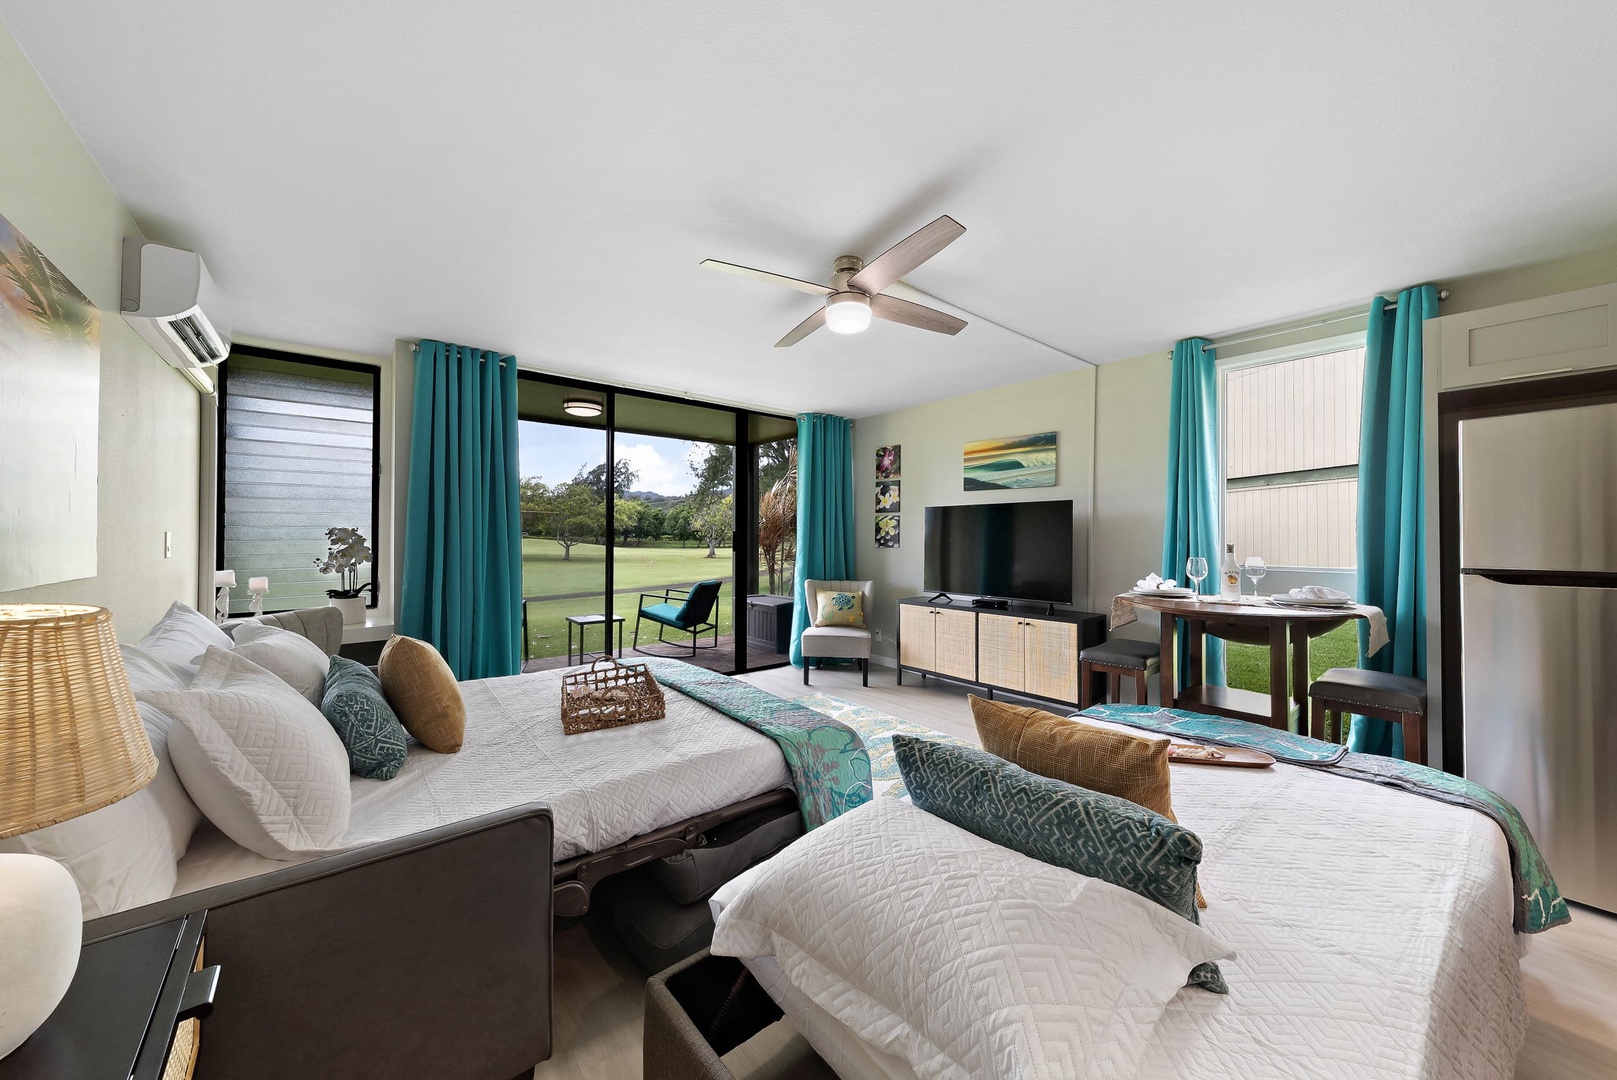 Kahuku Vacation Rentals, Turtle Bay's Kuilima Estates West #104 - The living area has a queen sleeper sofa and twin ottoman sleeper